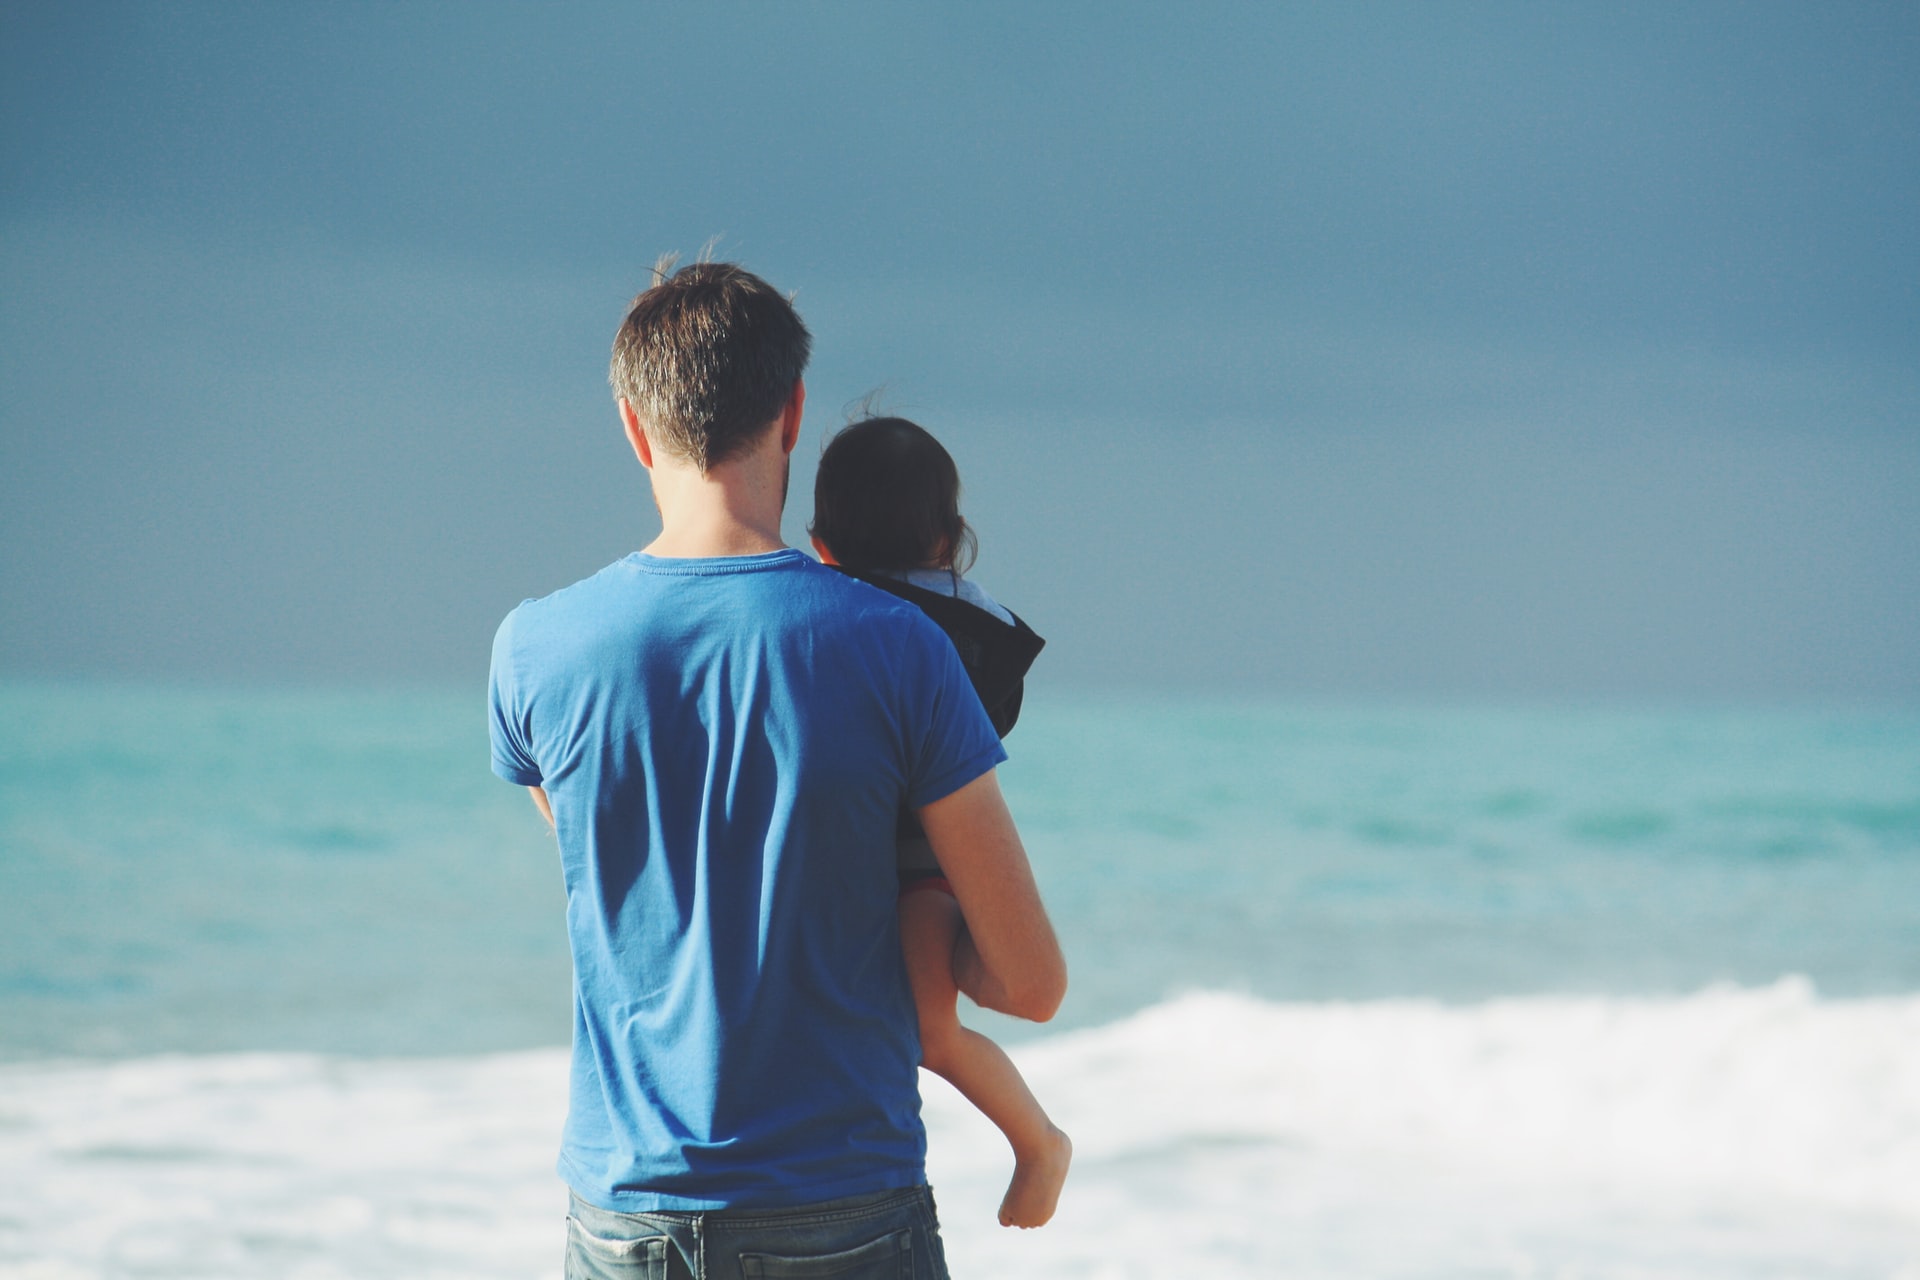 How Can New Dads Deal with Self-Doubt and Anxiety About Parenthood?